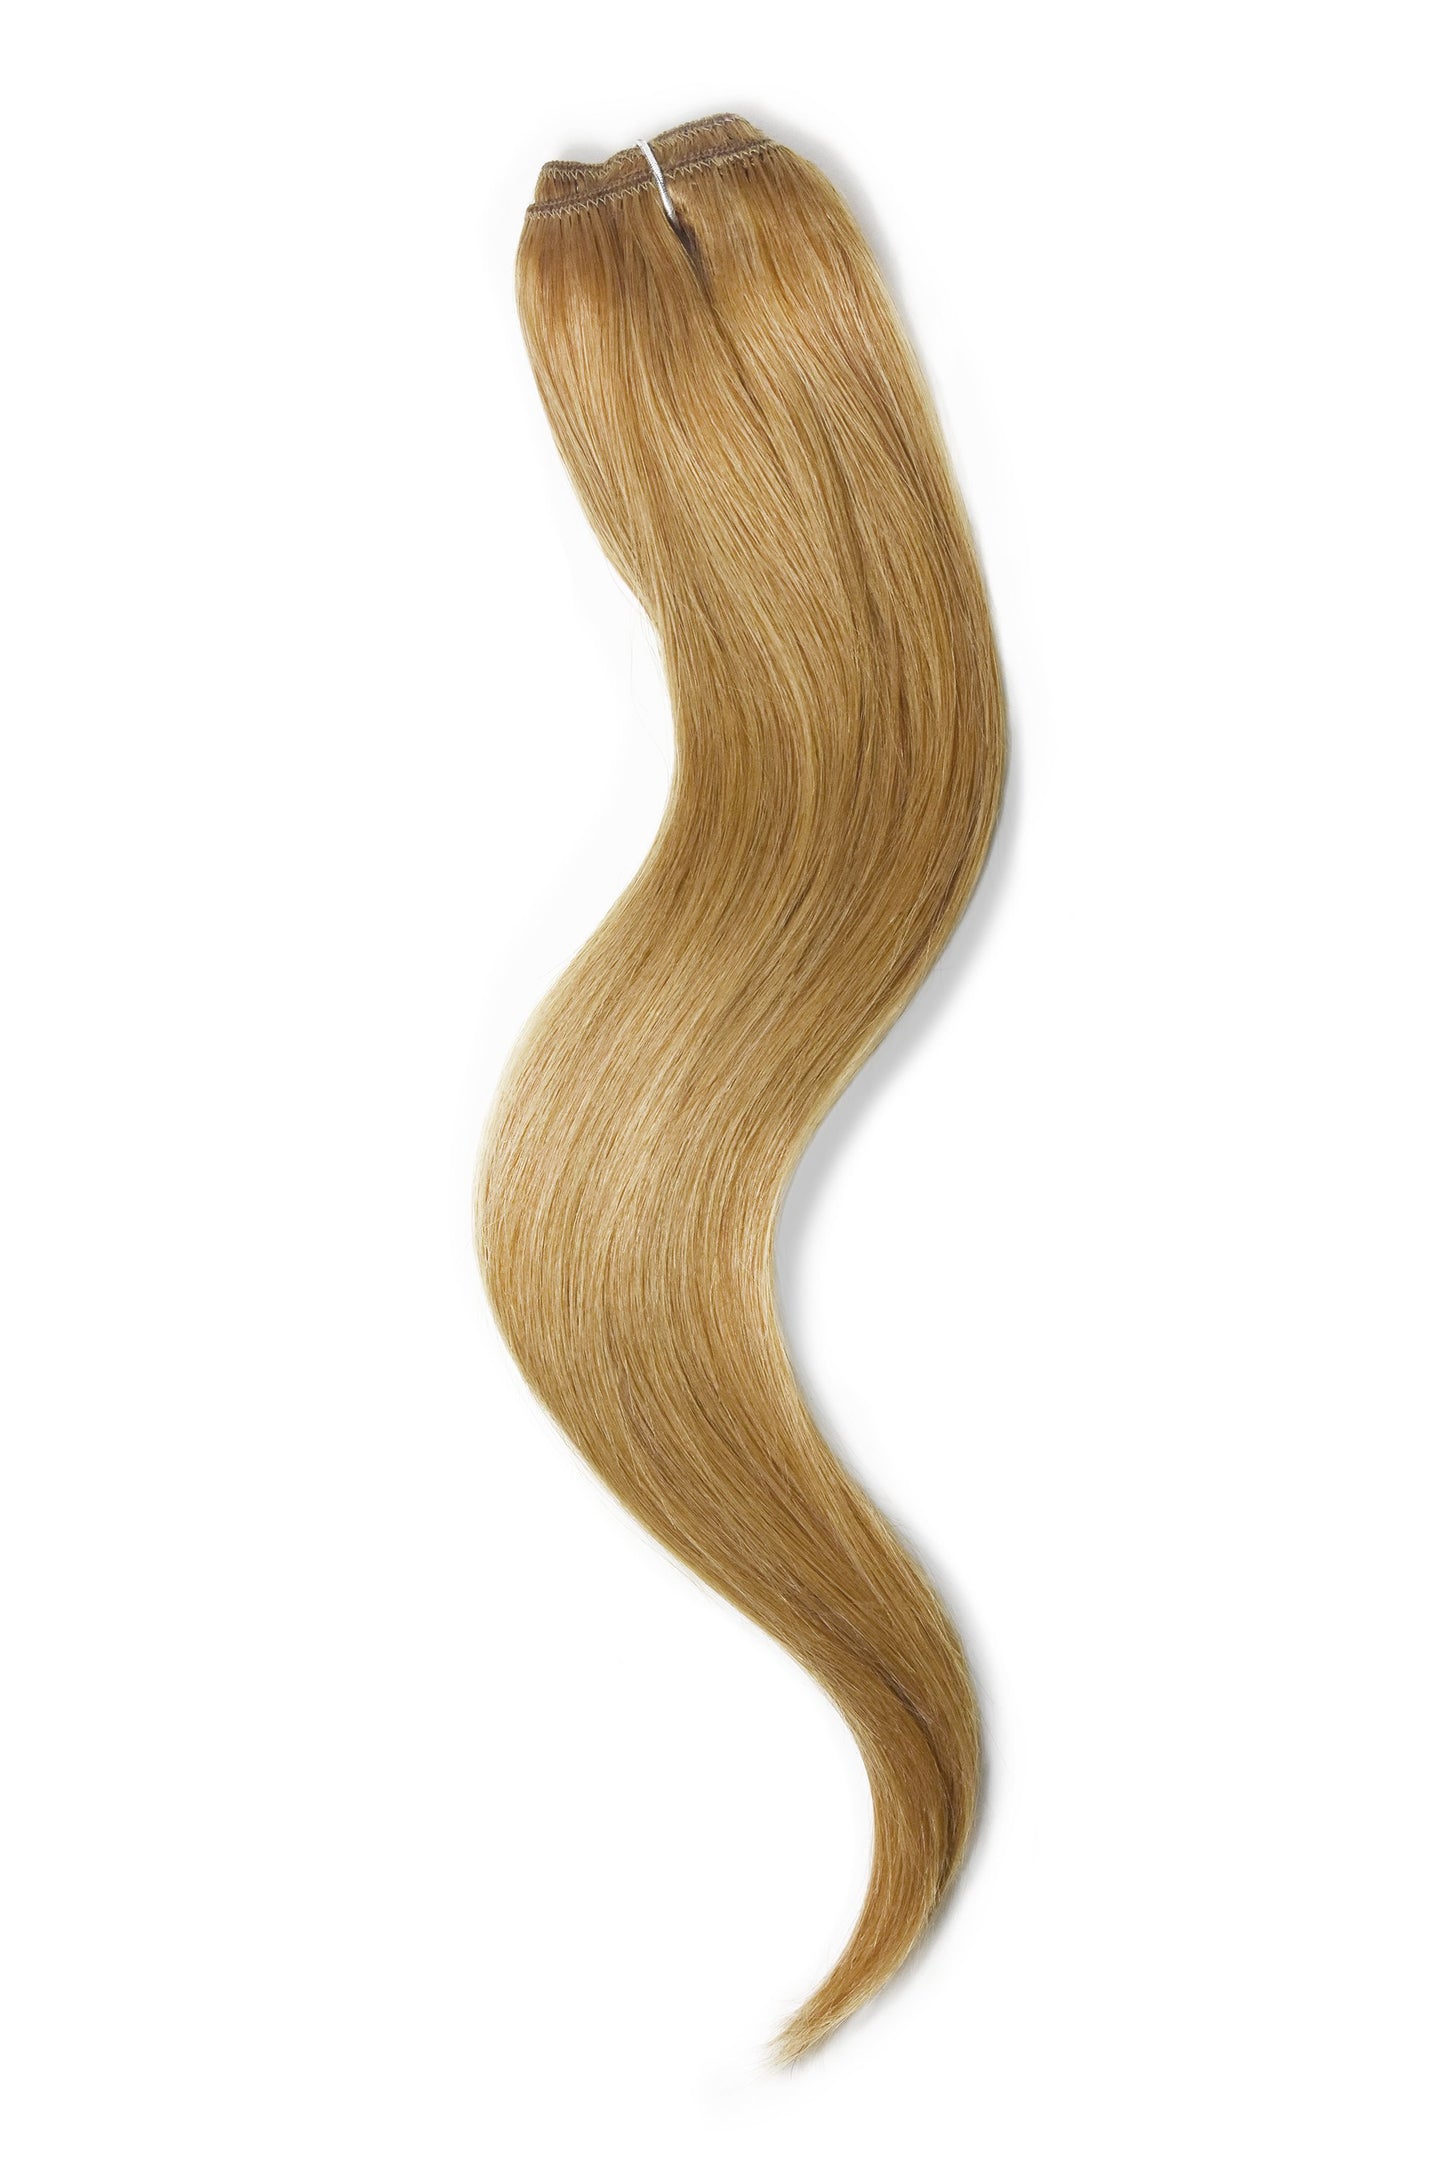 One Piece Top-up Remy Clip in Human Hair Extensions - Strawberry/Ginger Blonde (#27)